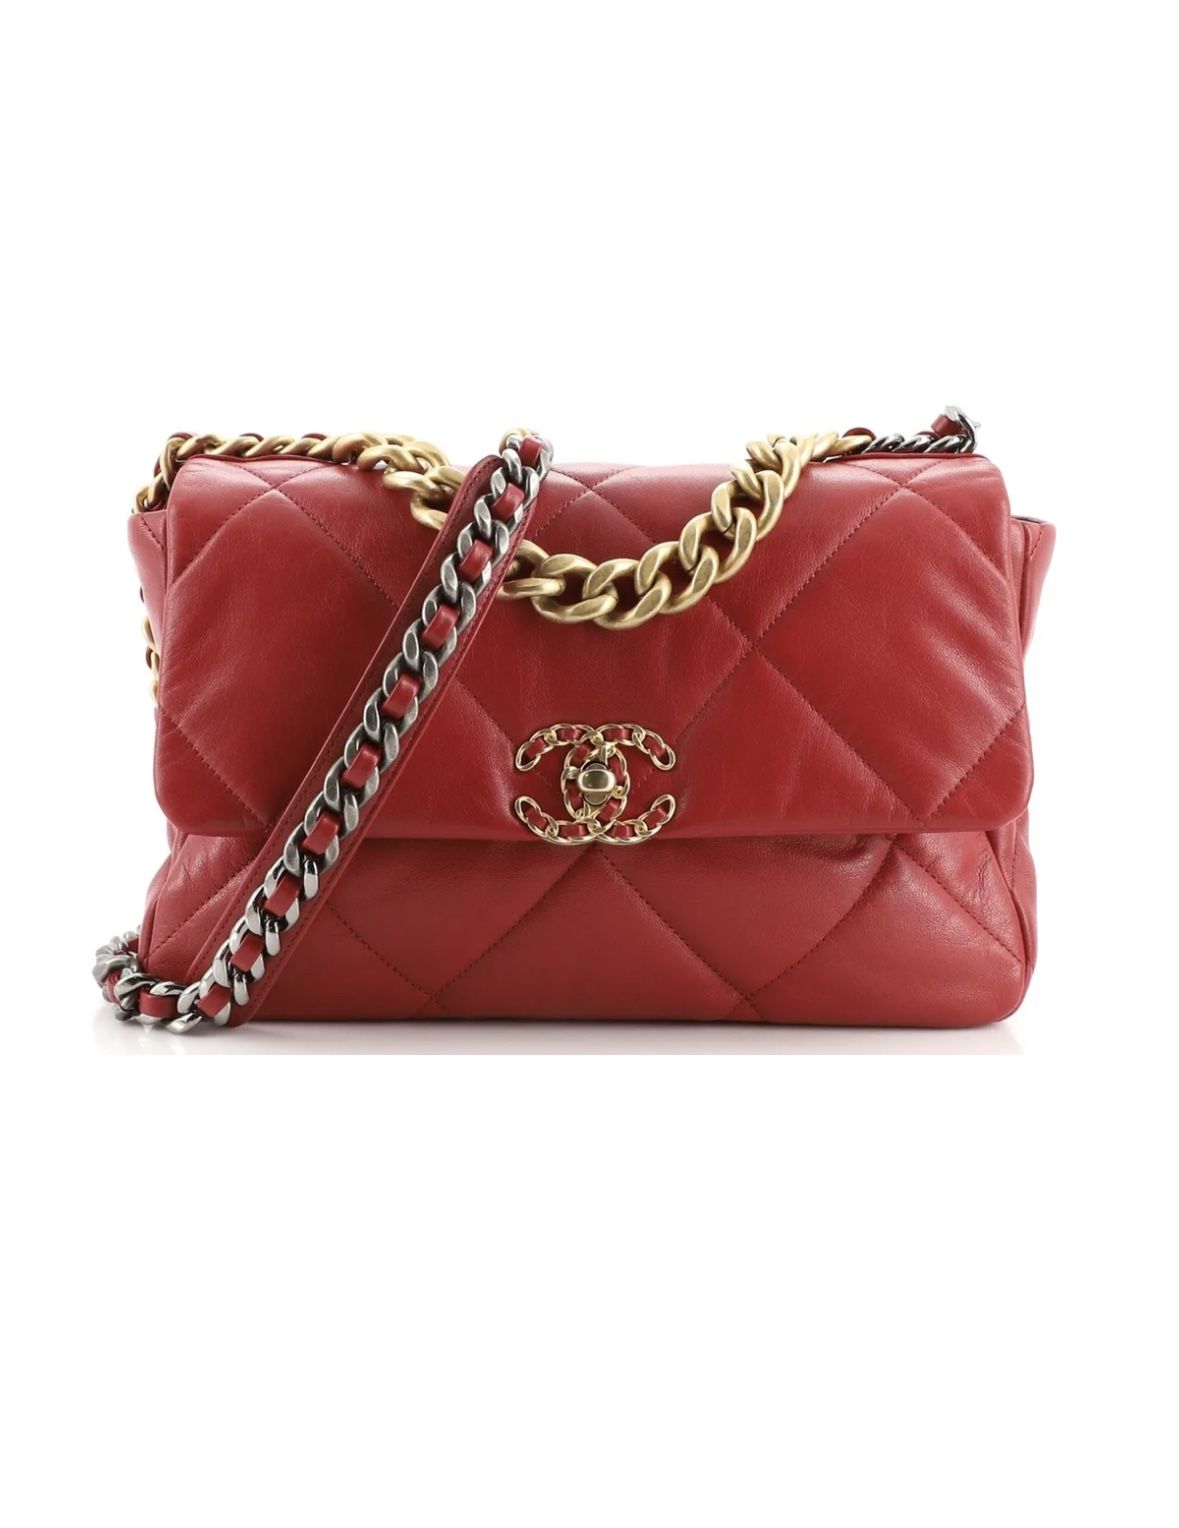 Chanel 19 Flap Bag Quilted Leather Large Red